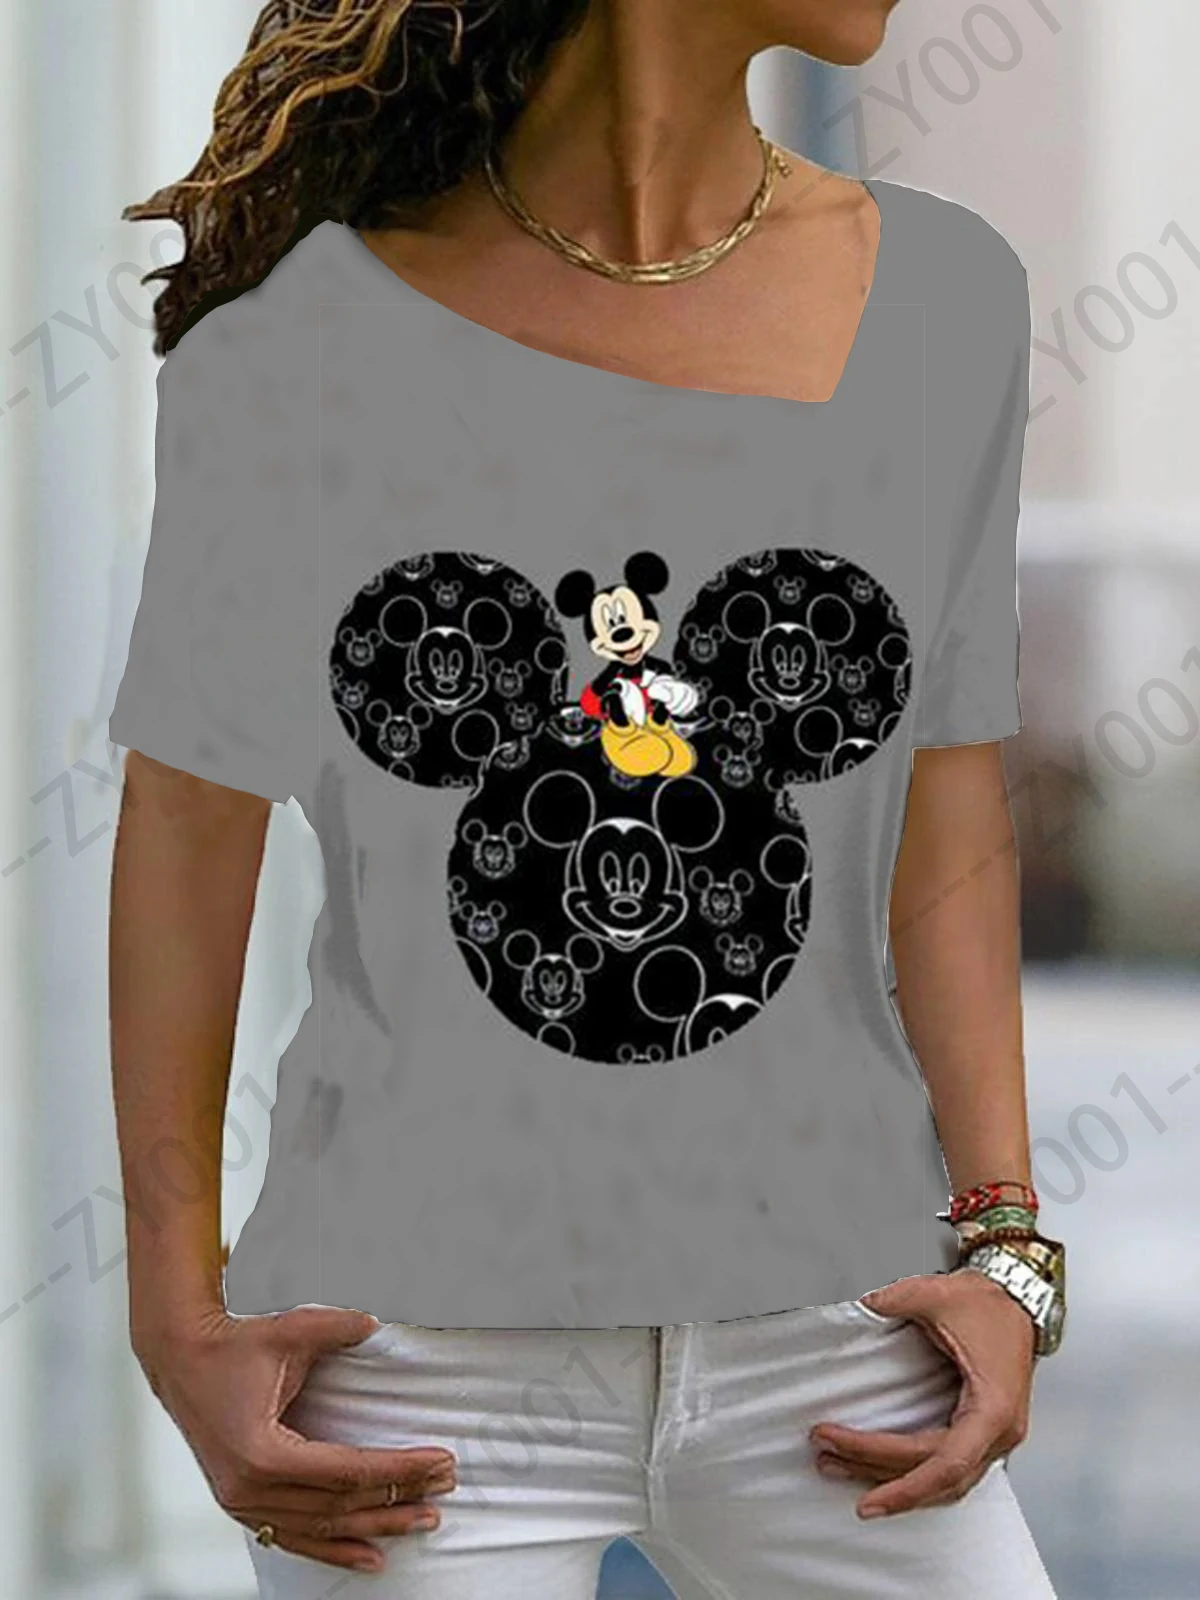 

Disney Mickey Mouse Woman Clothes Manga Women's T-shirts Short Sleeve Kara Tee BLOUS FOR WOMAN CROP TOP Blouses Female Clothing